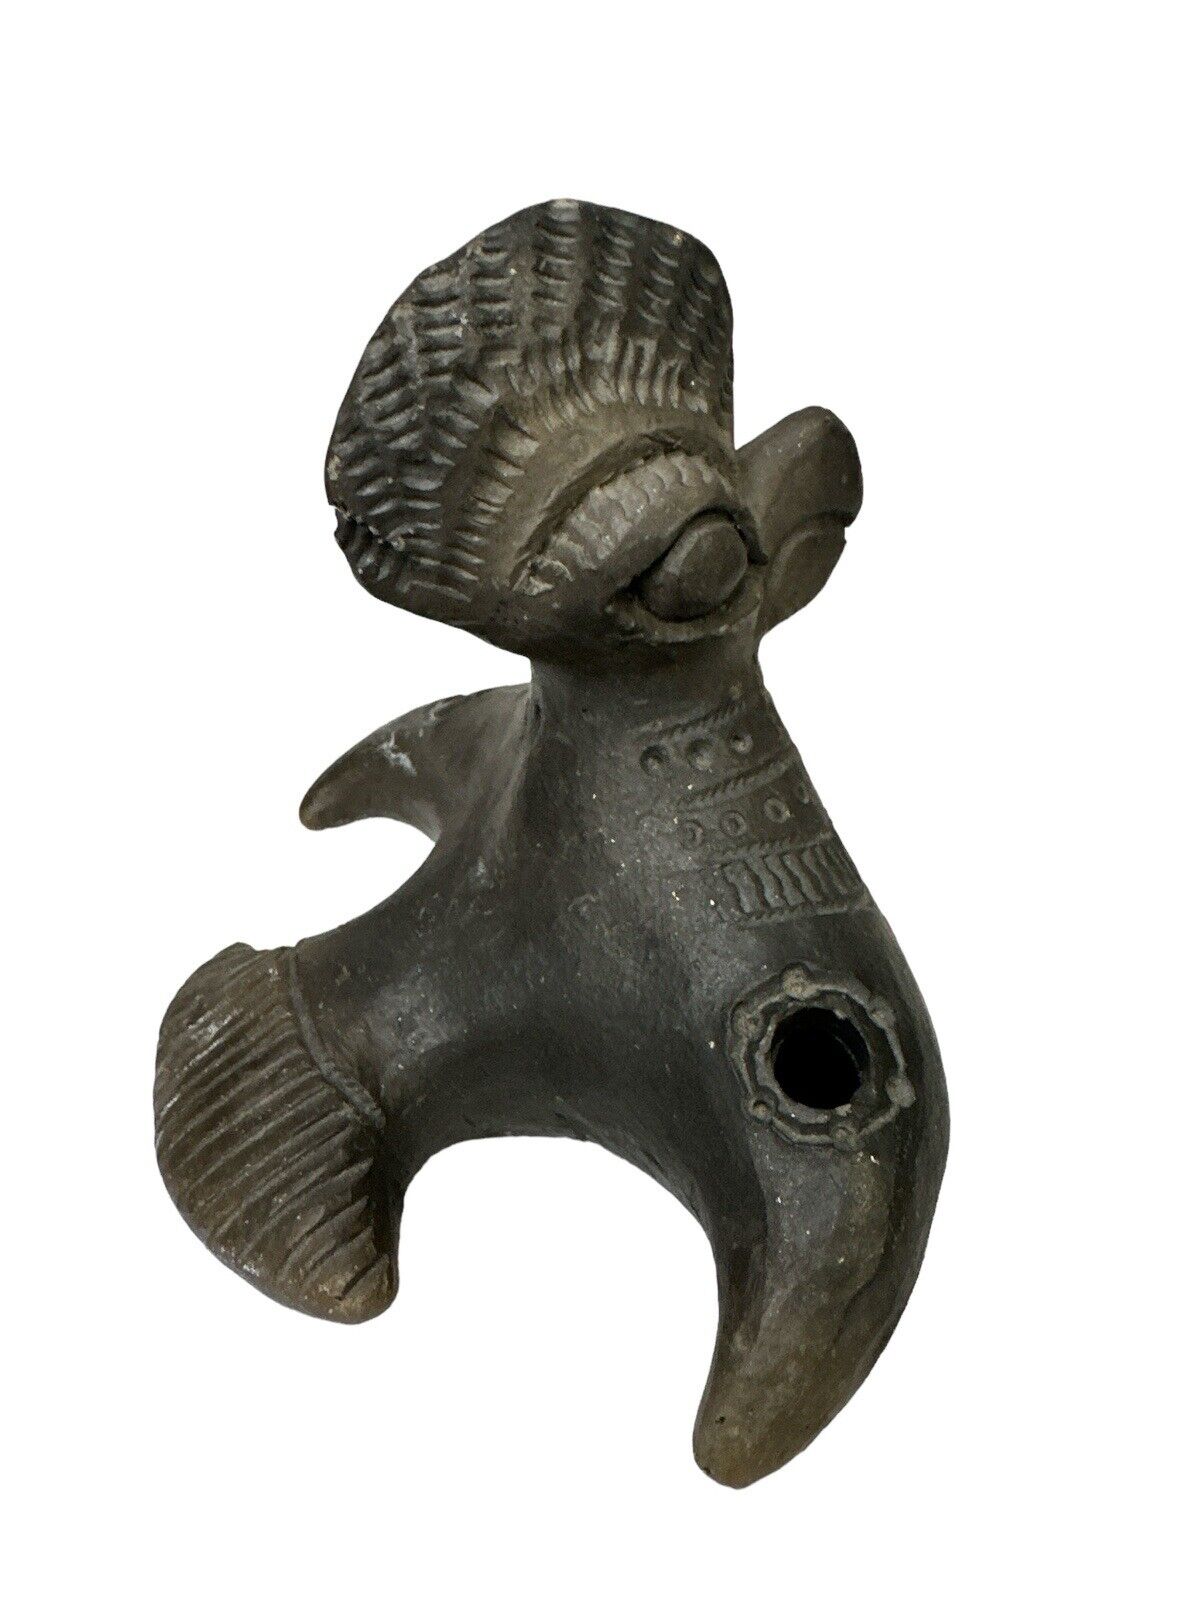 Peruvian Pre Columbian Ceramic flying Bird Whistle Instrument - Possibly Chimu